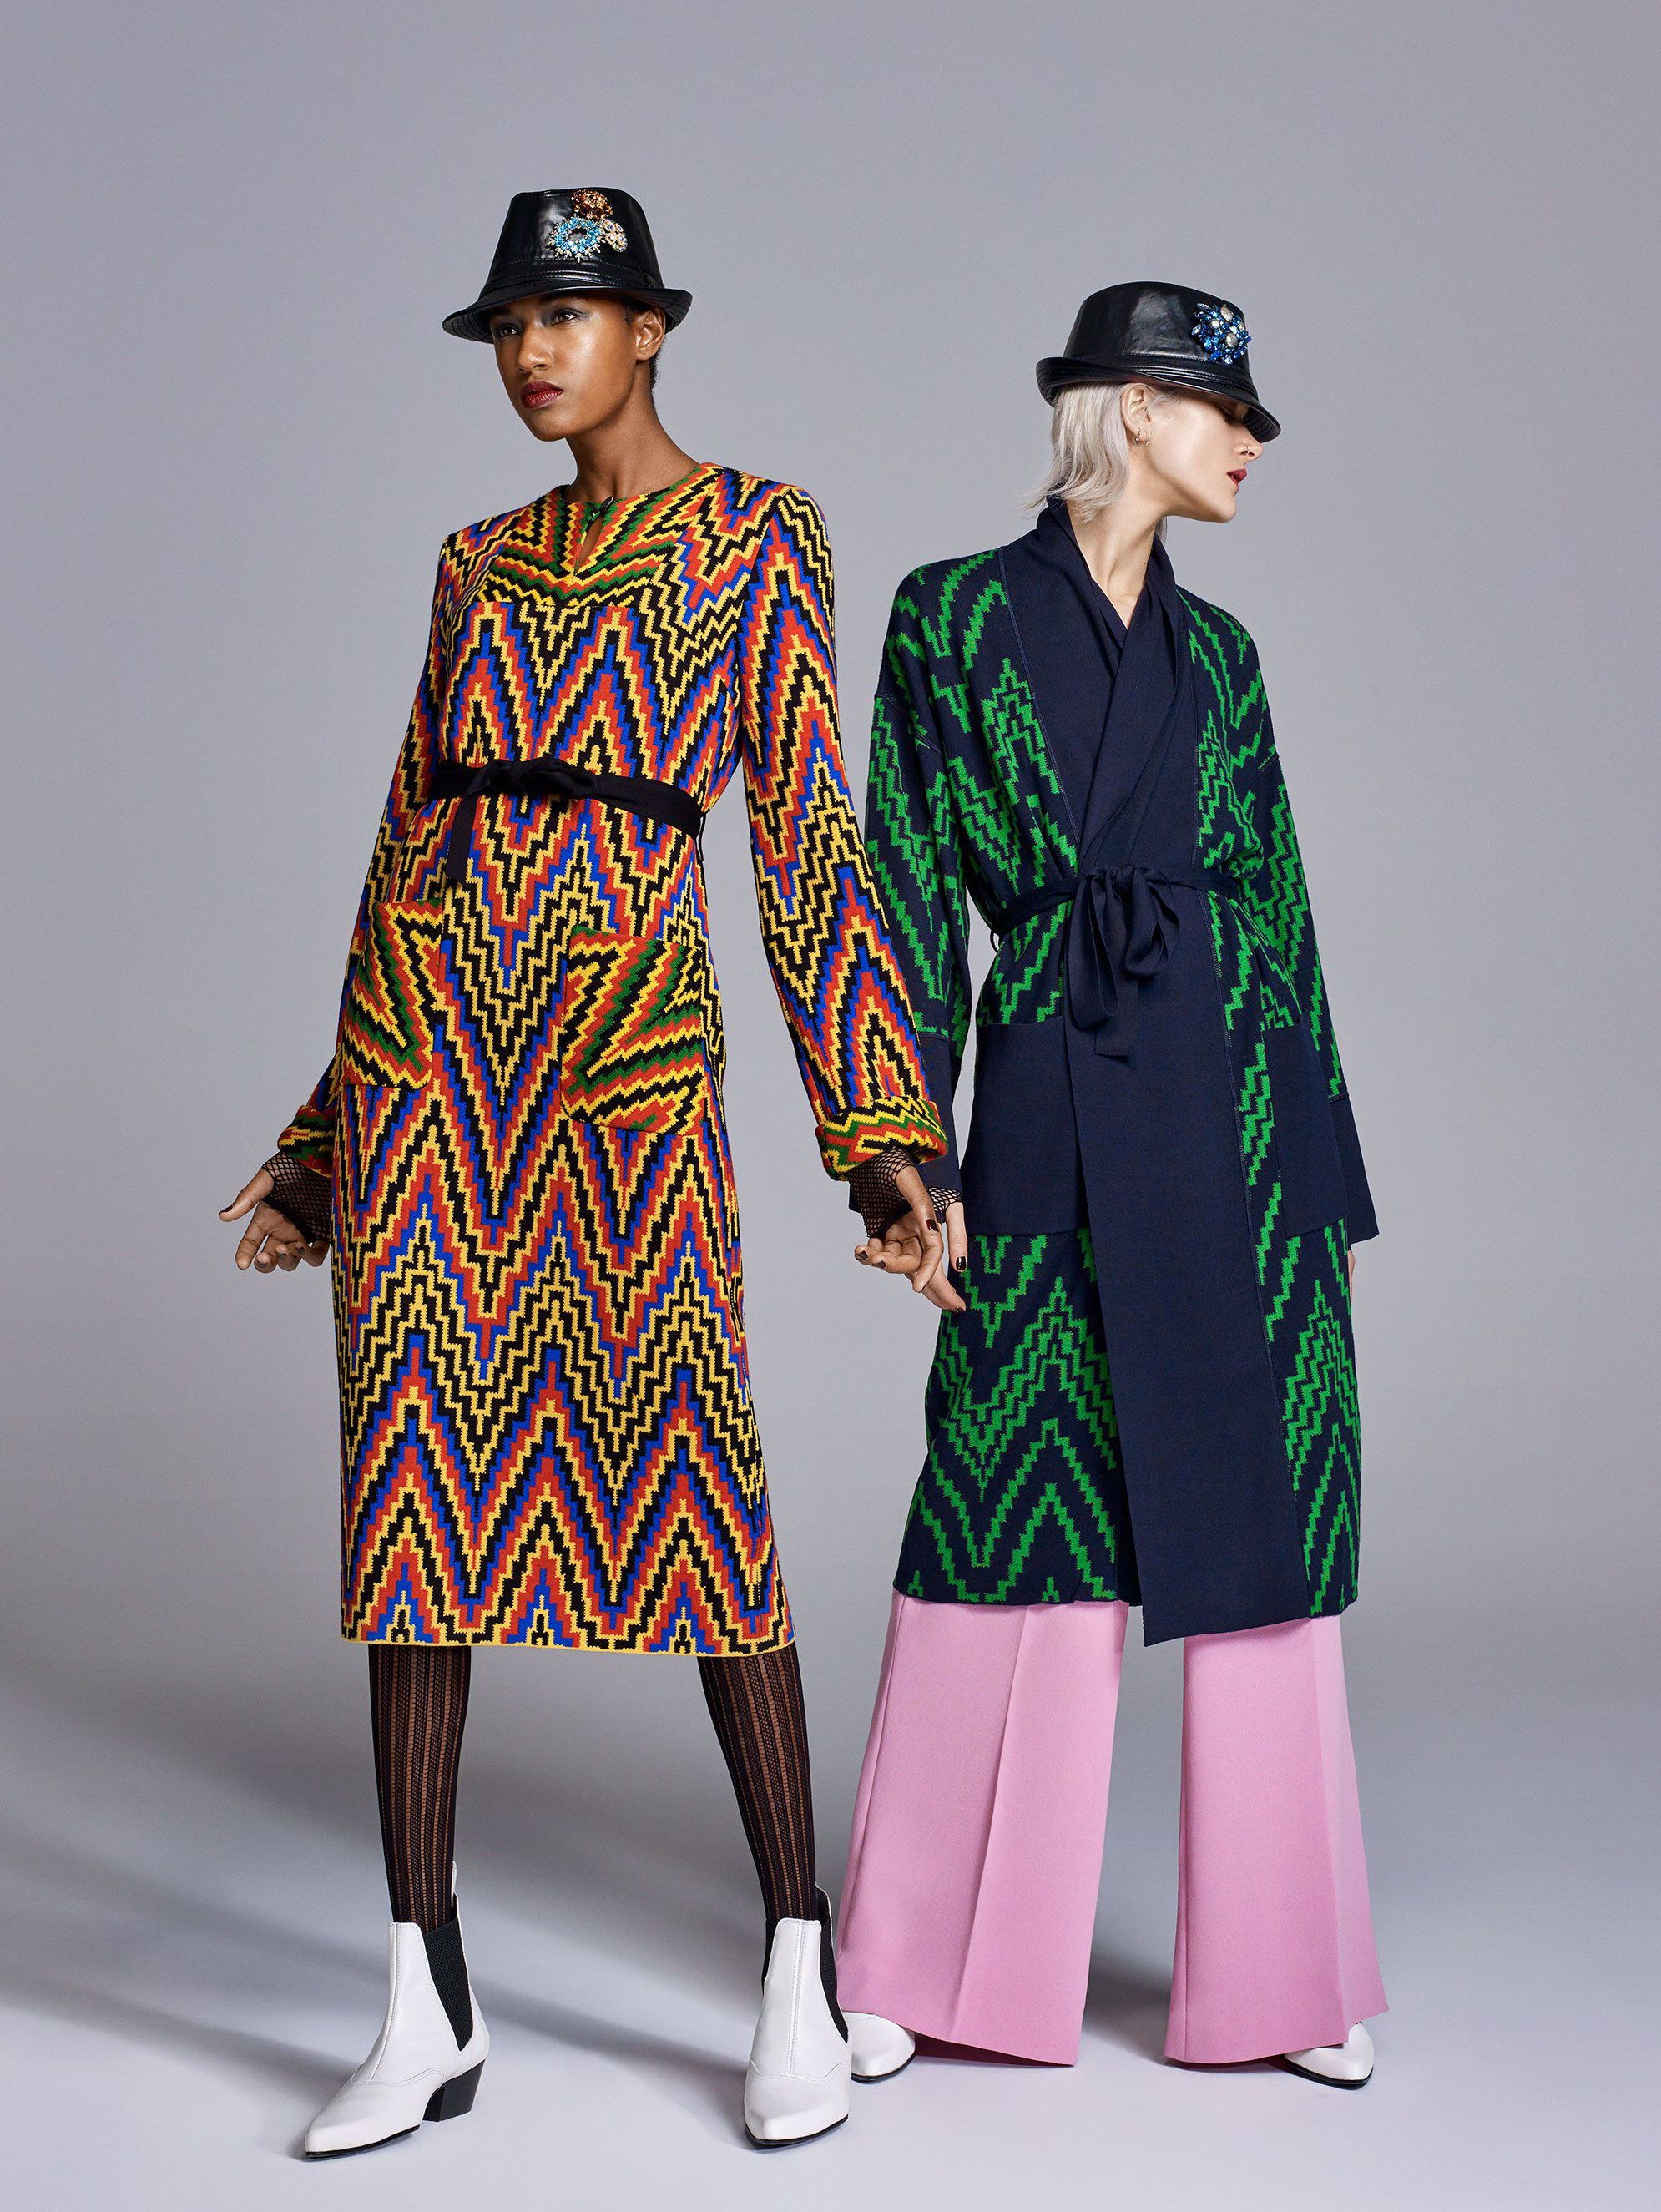 Power Prints! Duro-Olowu's fall 18 ready to wear Collection